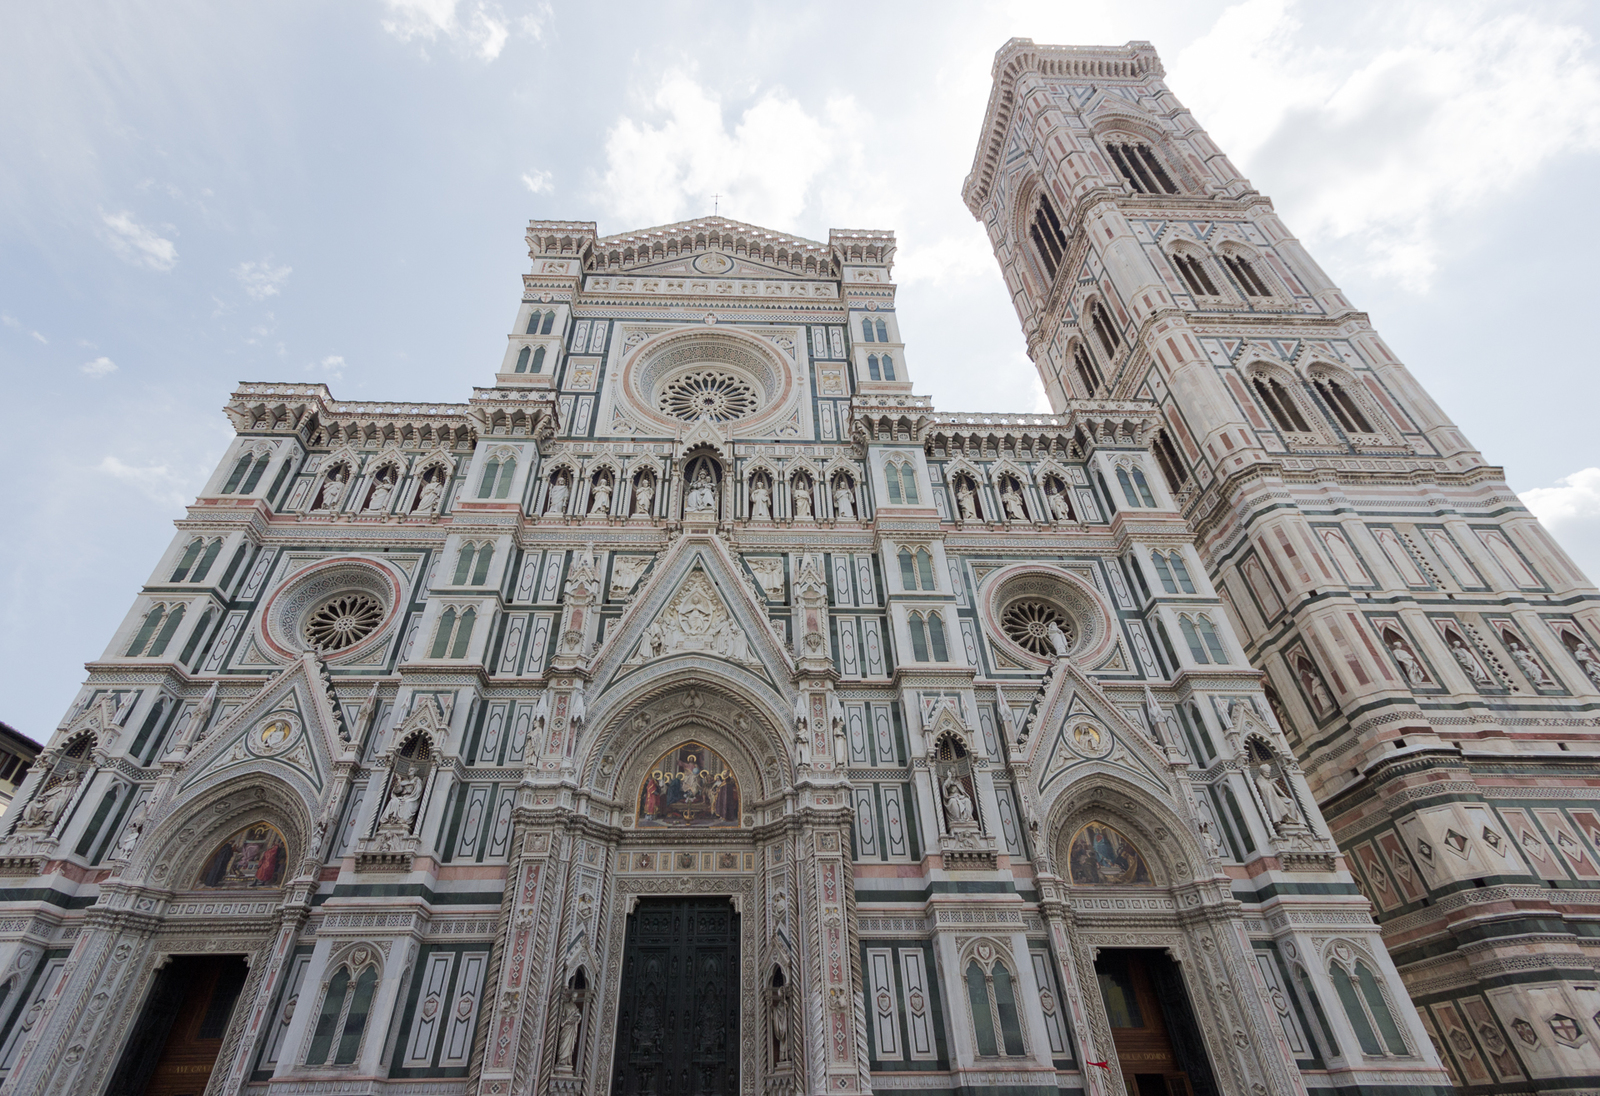 A little more Italy for you - My, Italy, Travels, The photo, beauty, Florence, Medici, Longpost